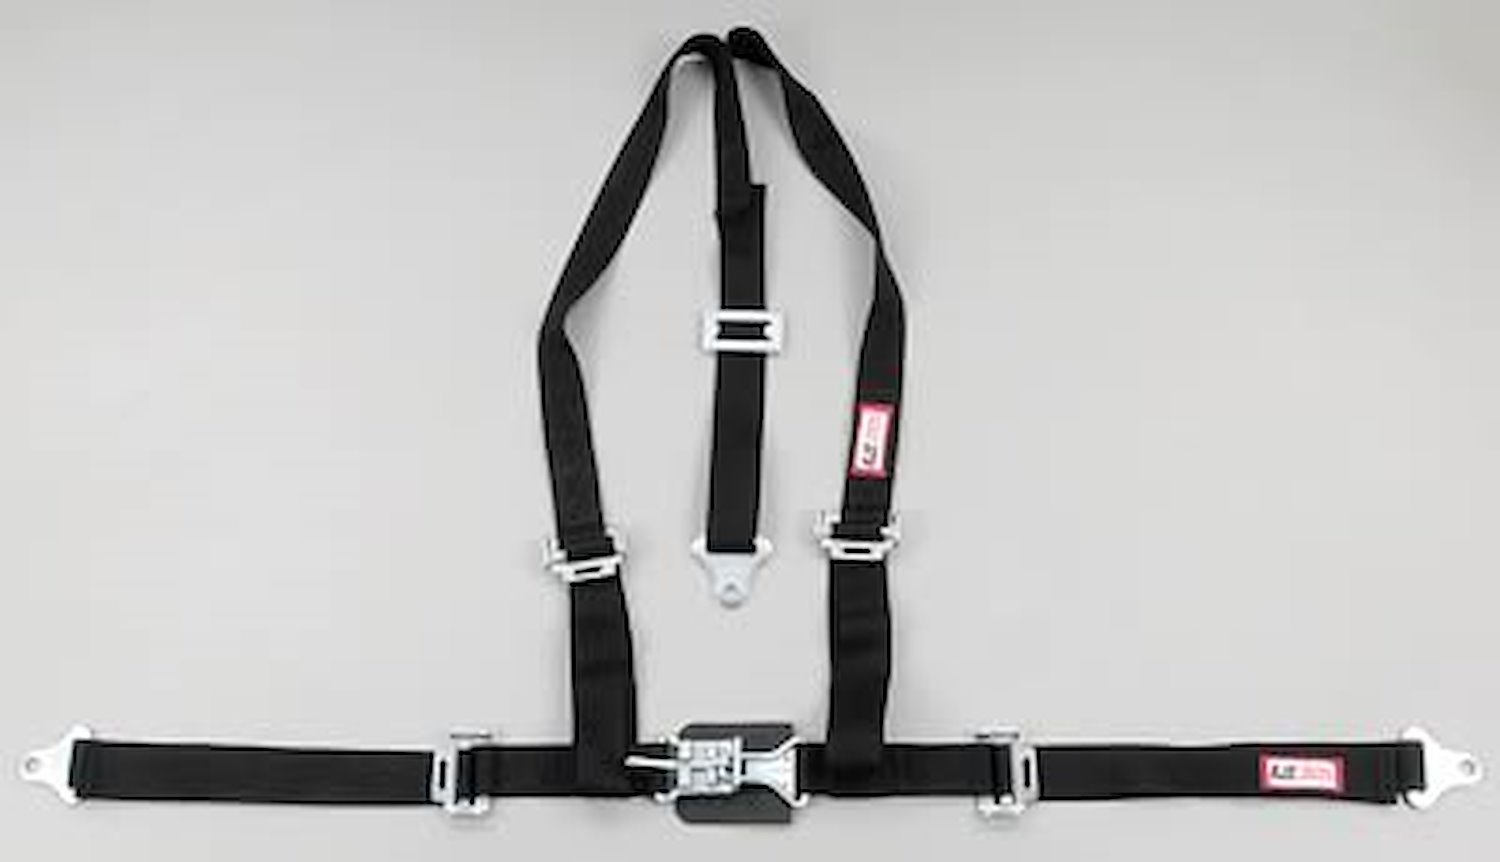 NON-SFI L&L HARNESS 3 PULL DOWN Lap Belt SNAP SEWN IN 2 S.H. Individual ROLL BAR Mount WRAP/SNAP BLACK